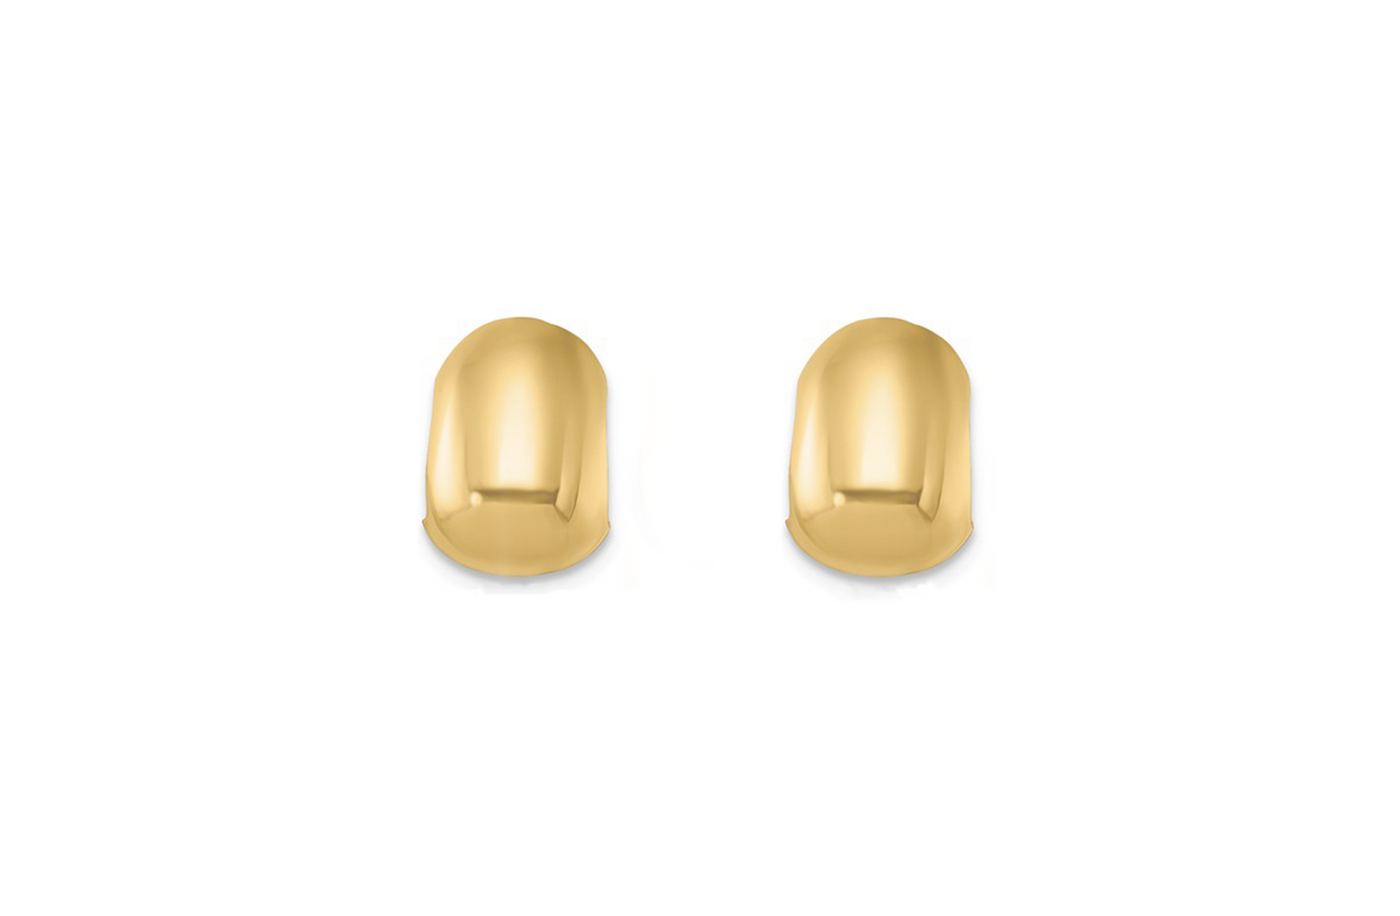 Pods Stud Earrings in Yellow Gold